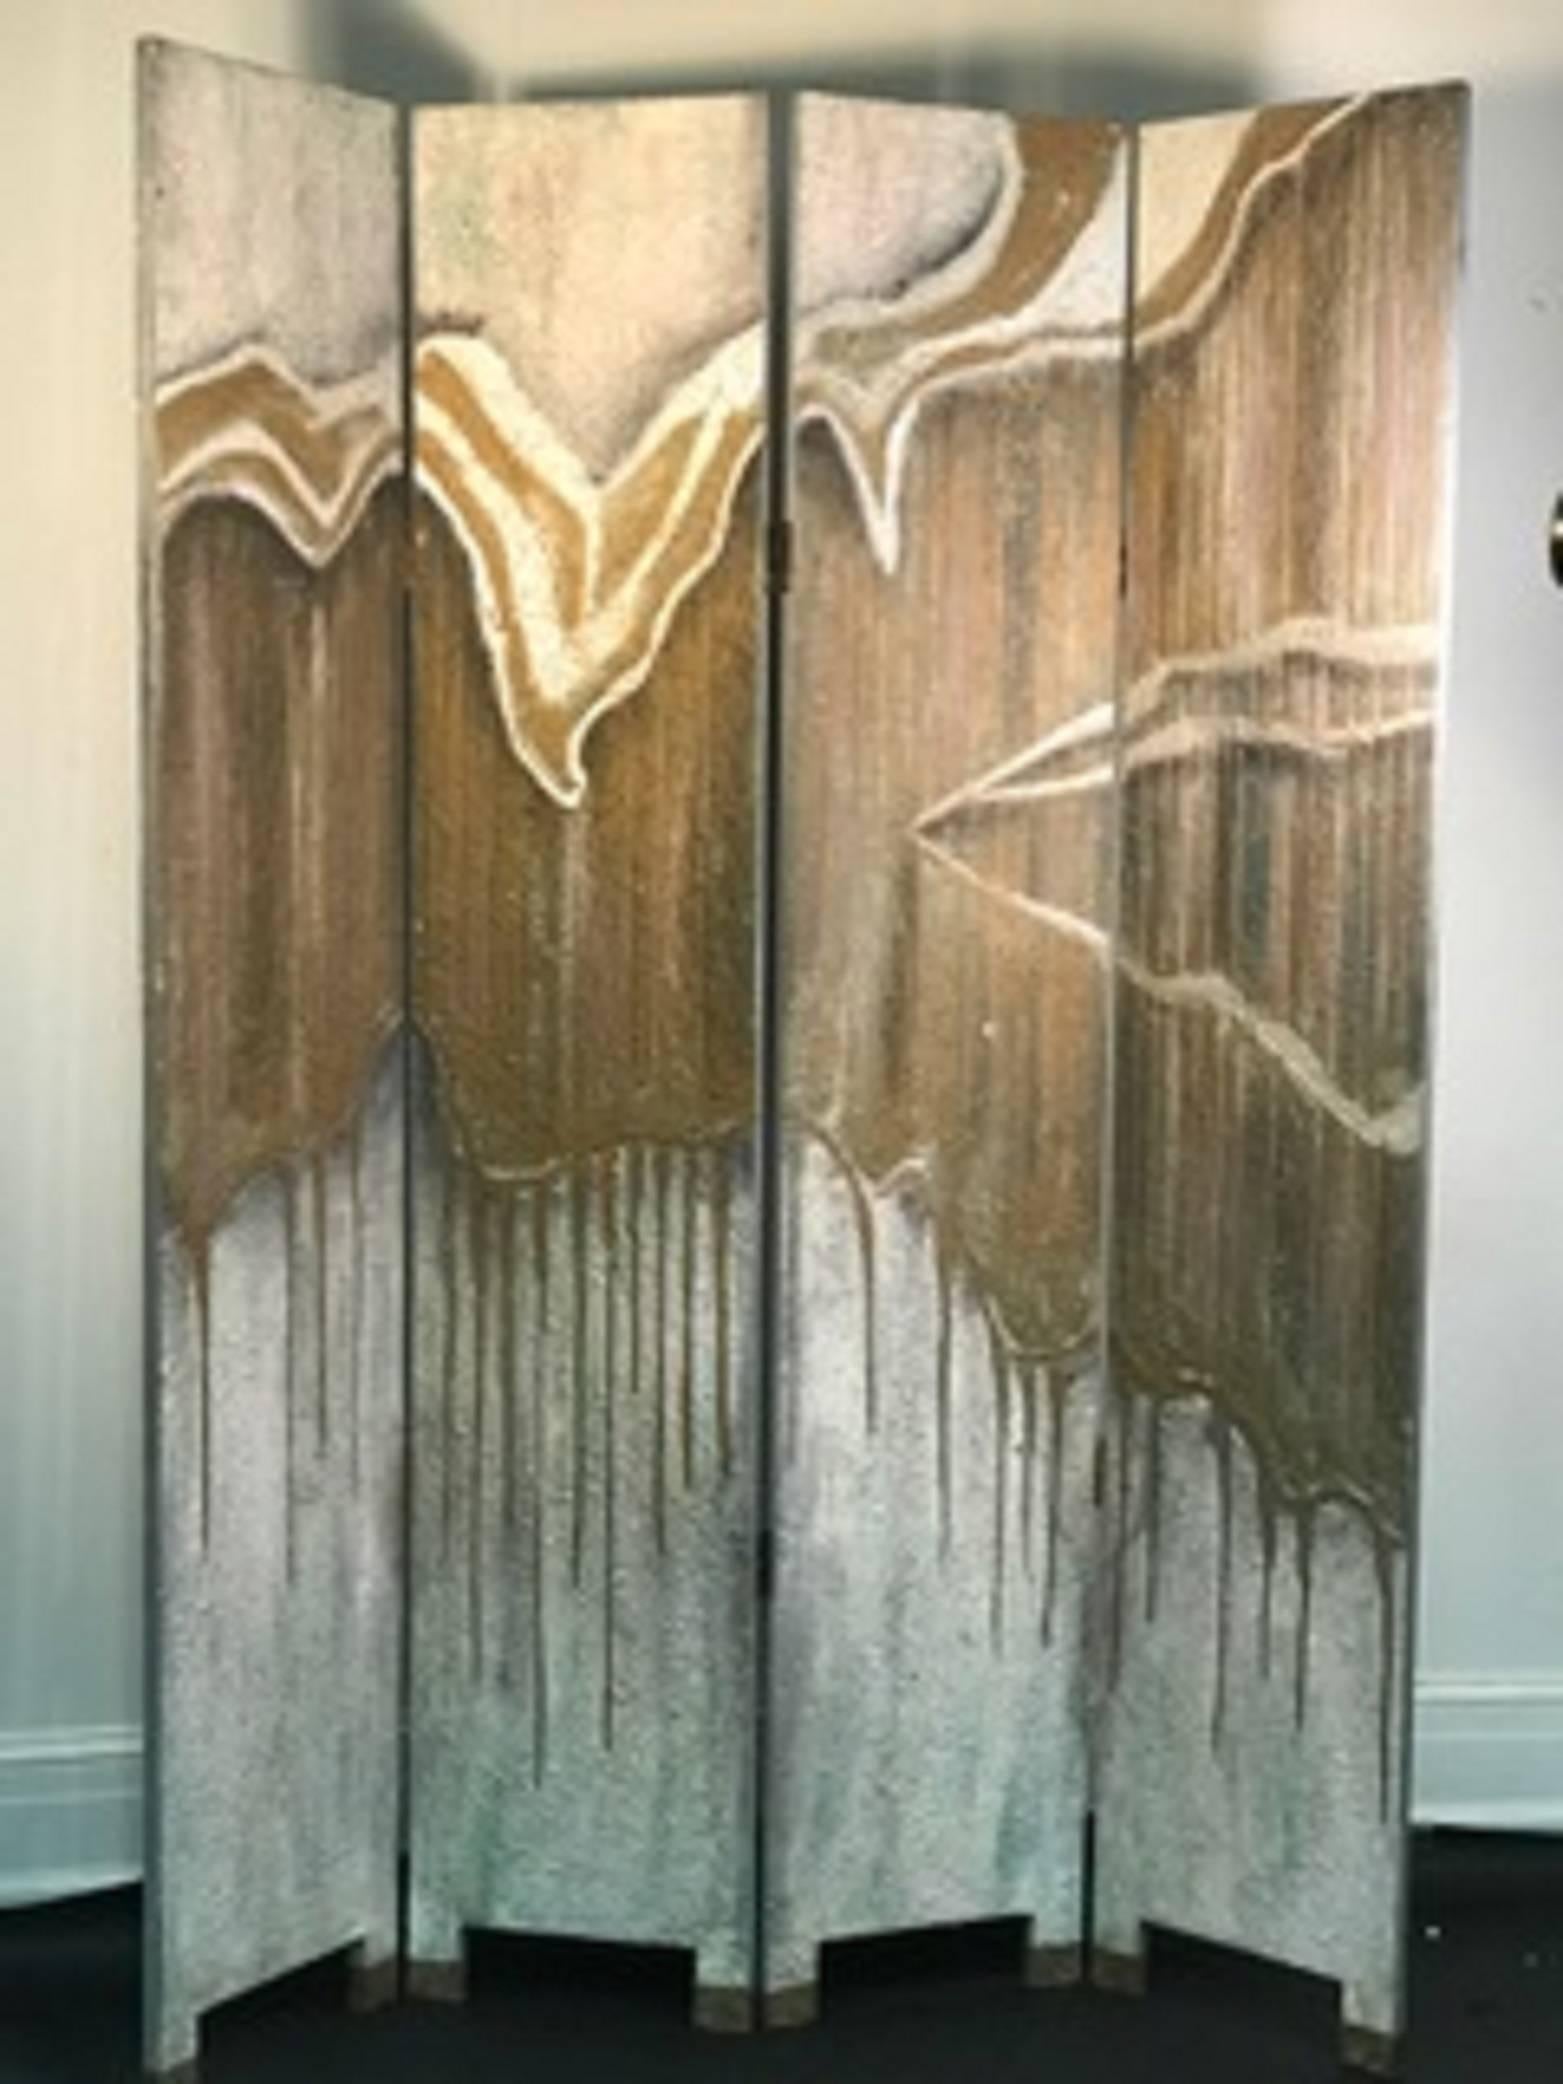 An exceptional French Art Deco four-panel screen with beautiful color, texture, and drip painting. Good vintage condition with some wear appropriate with age.